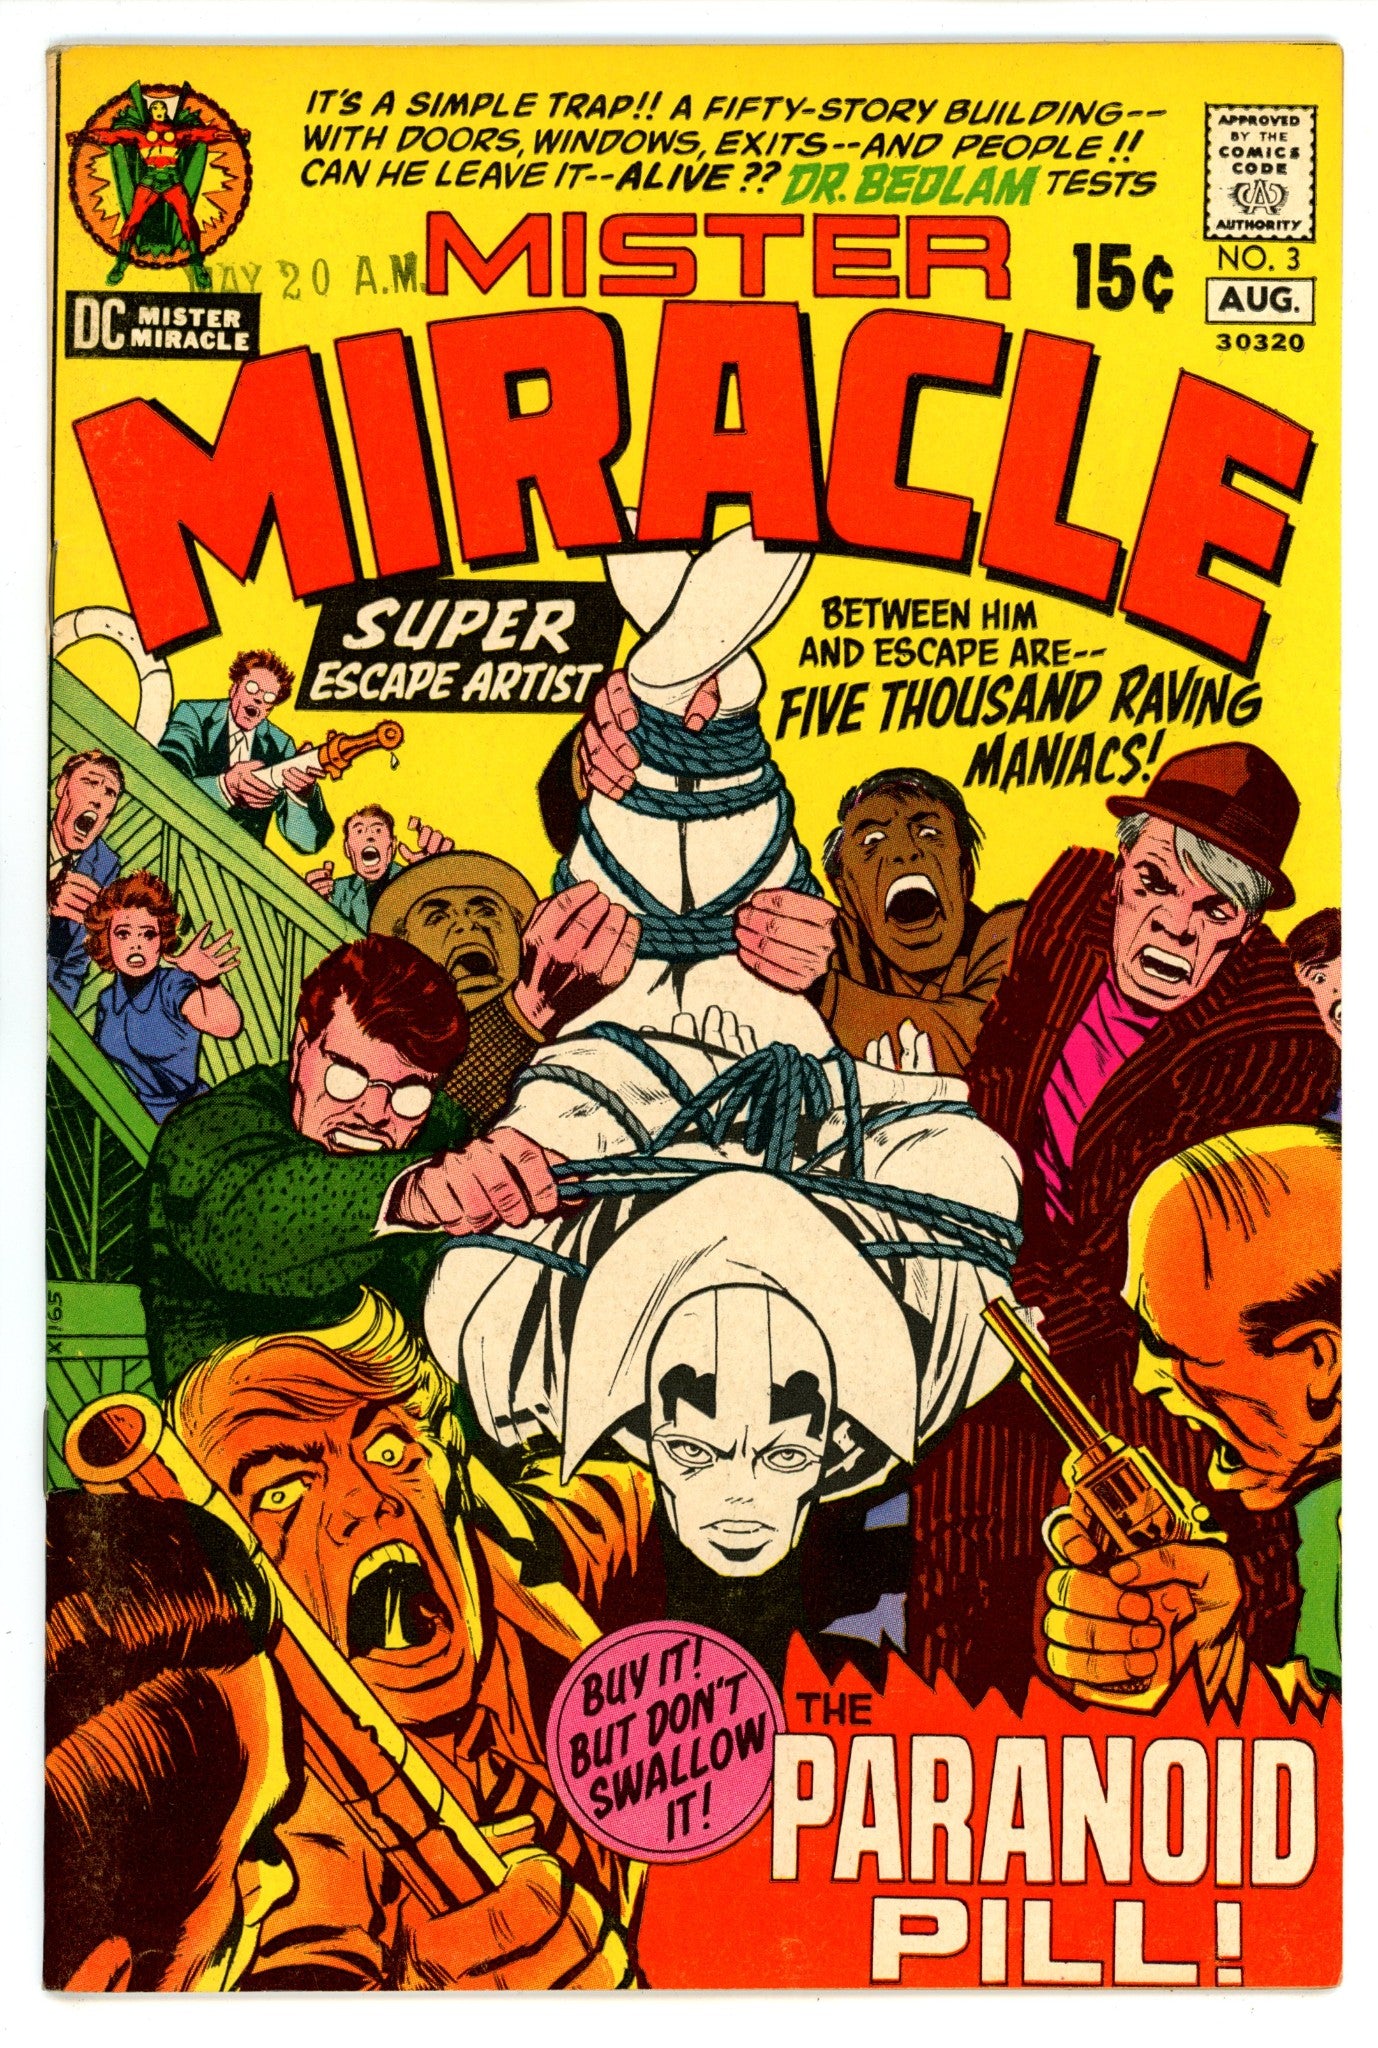 Mister Miracle Vol 1 3 FN/VF (7.0) (1971) 